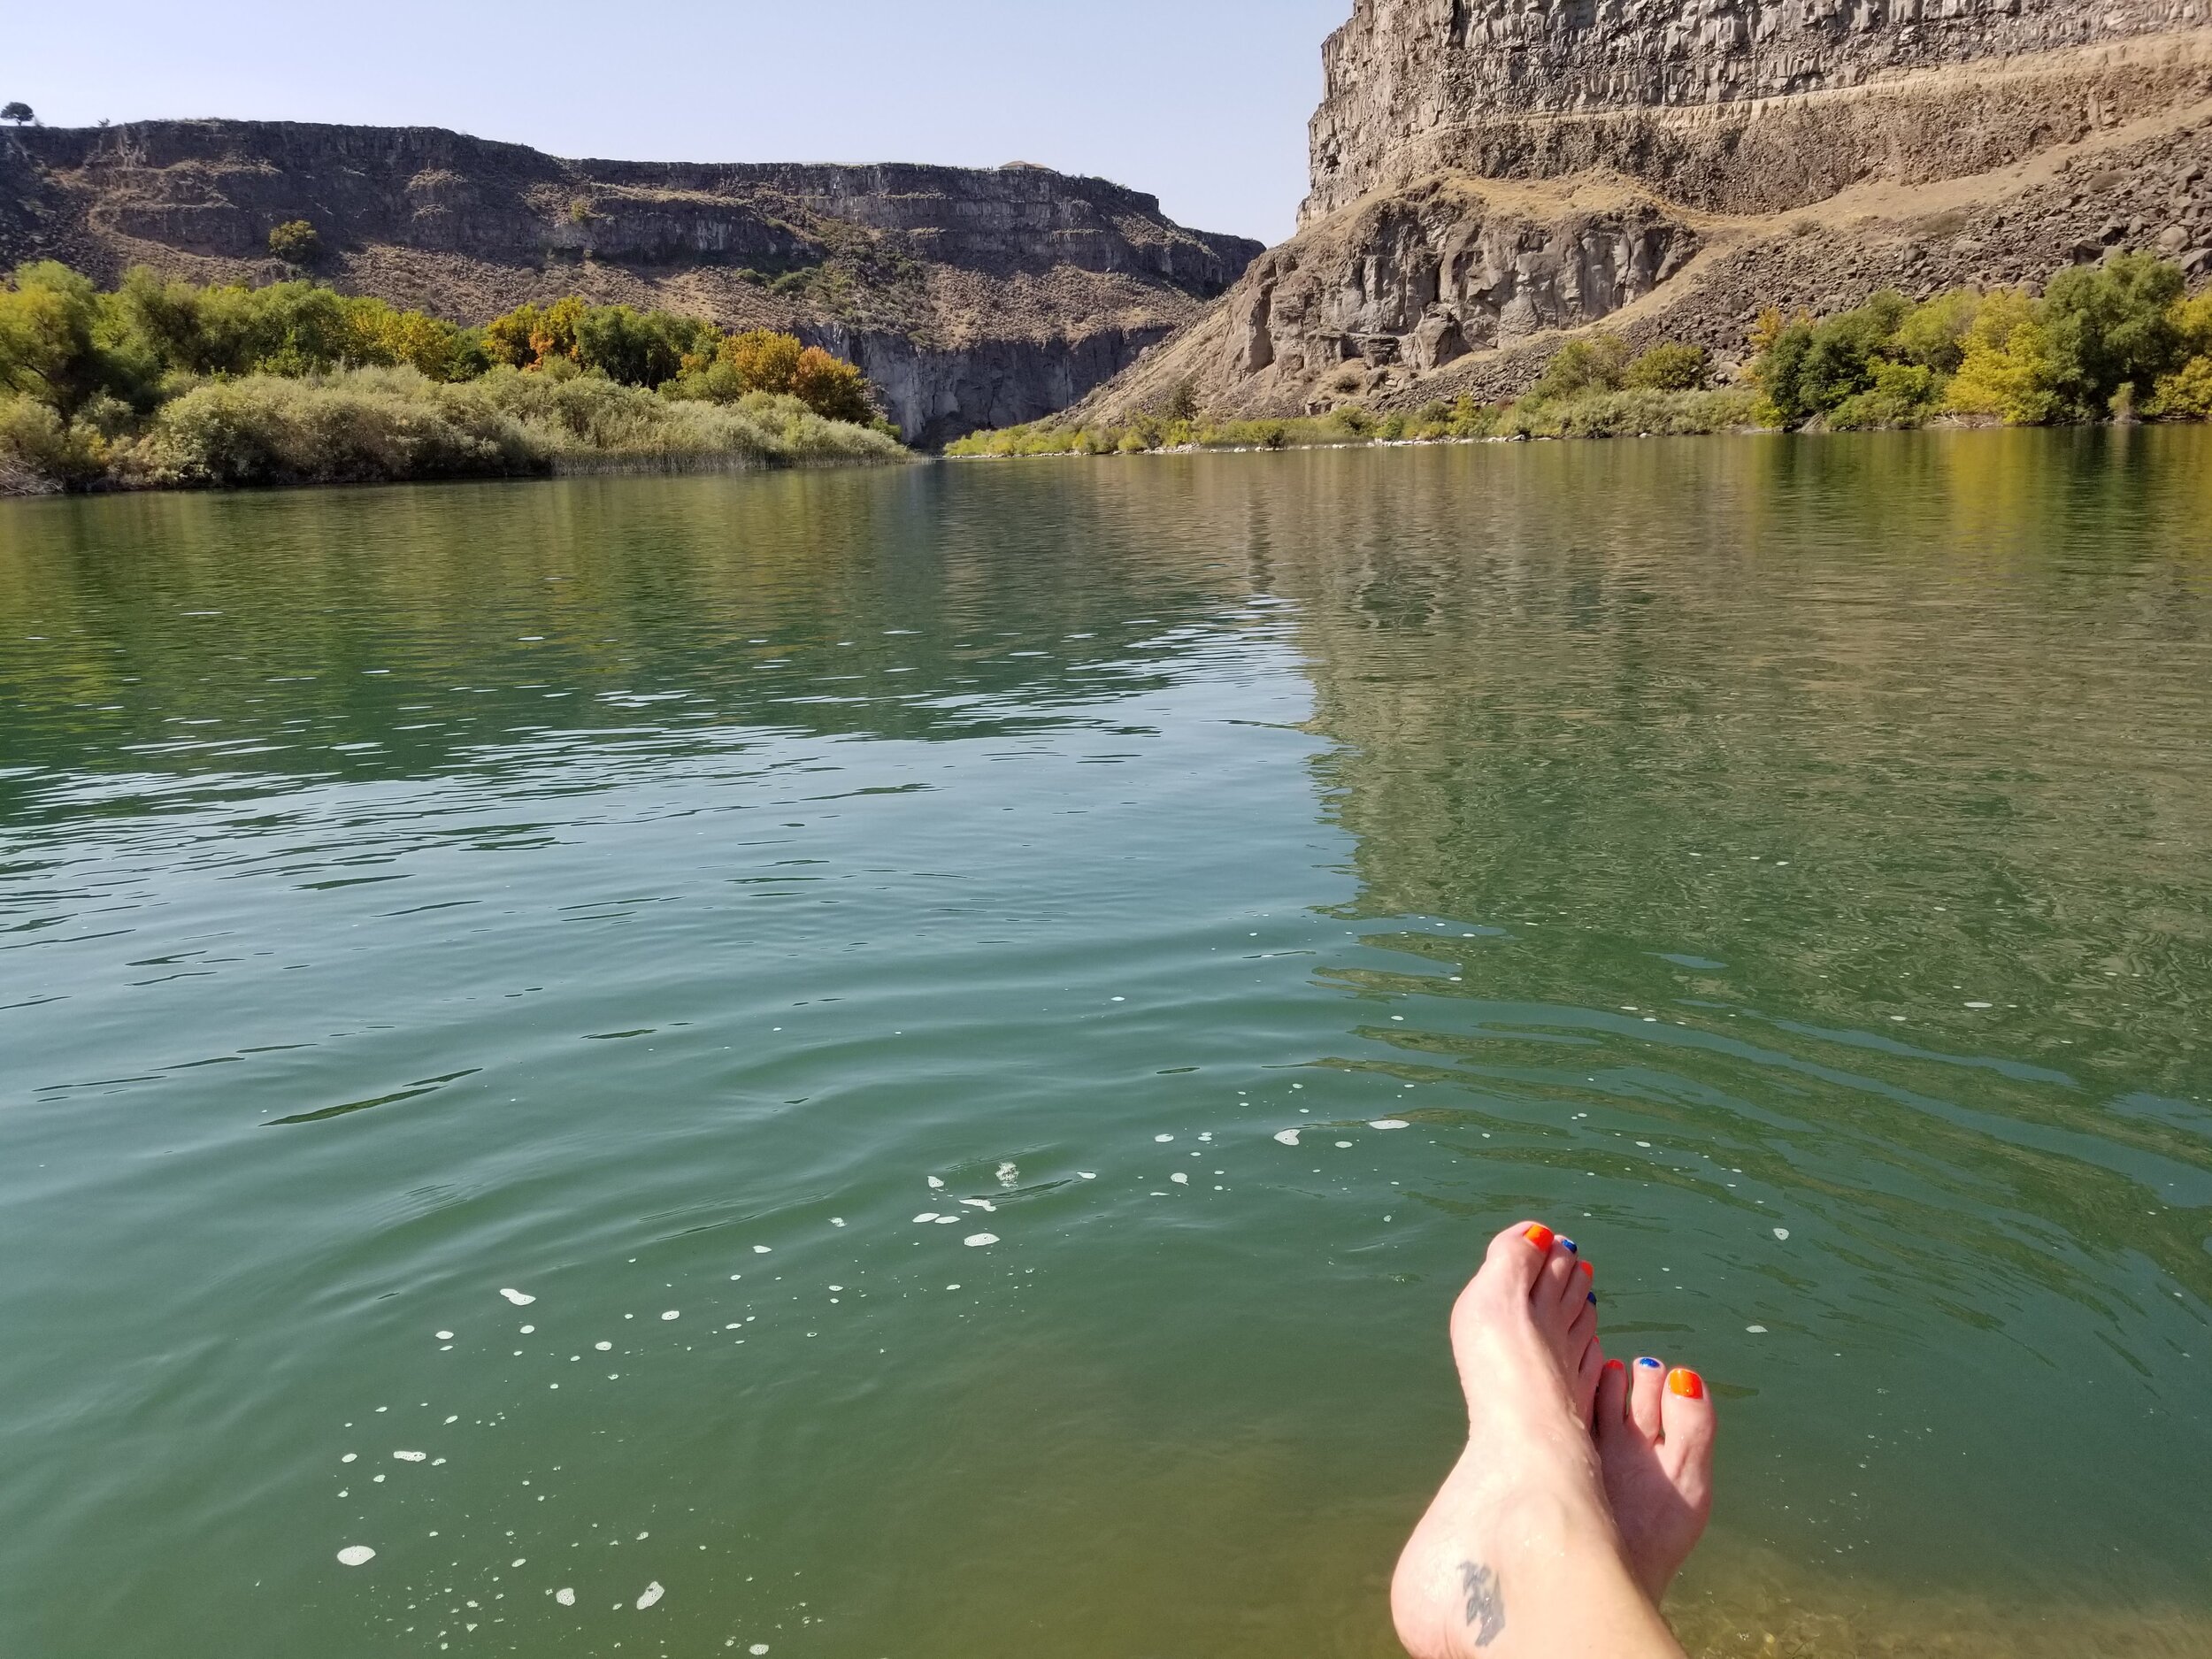 Snake River, ID